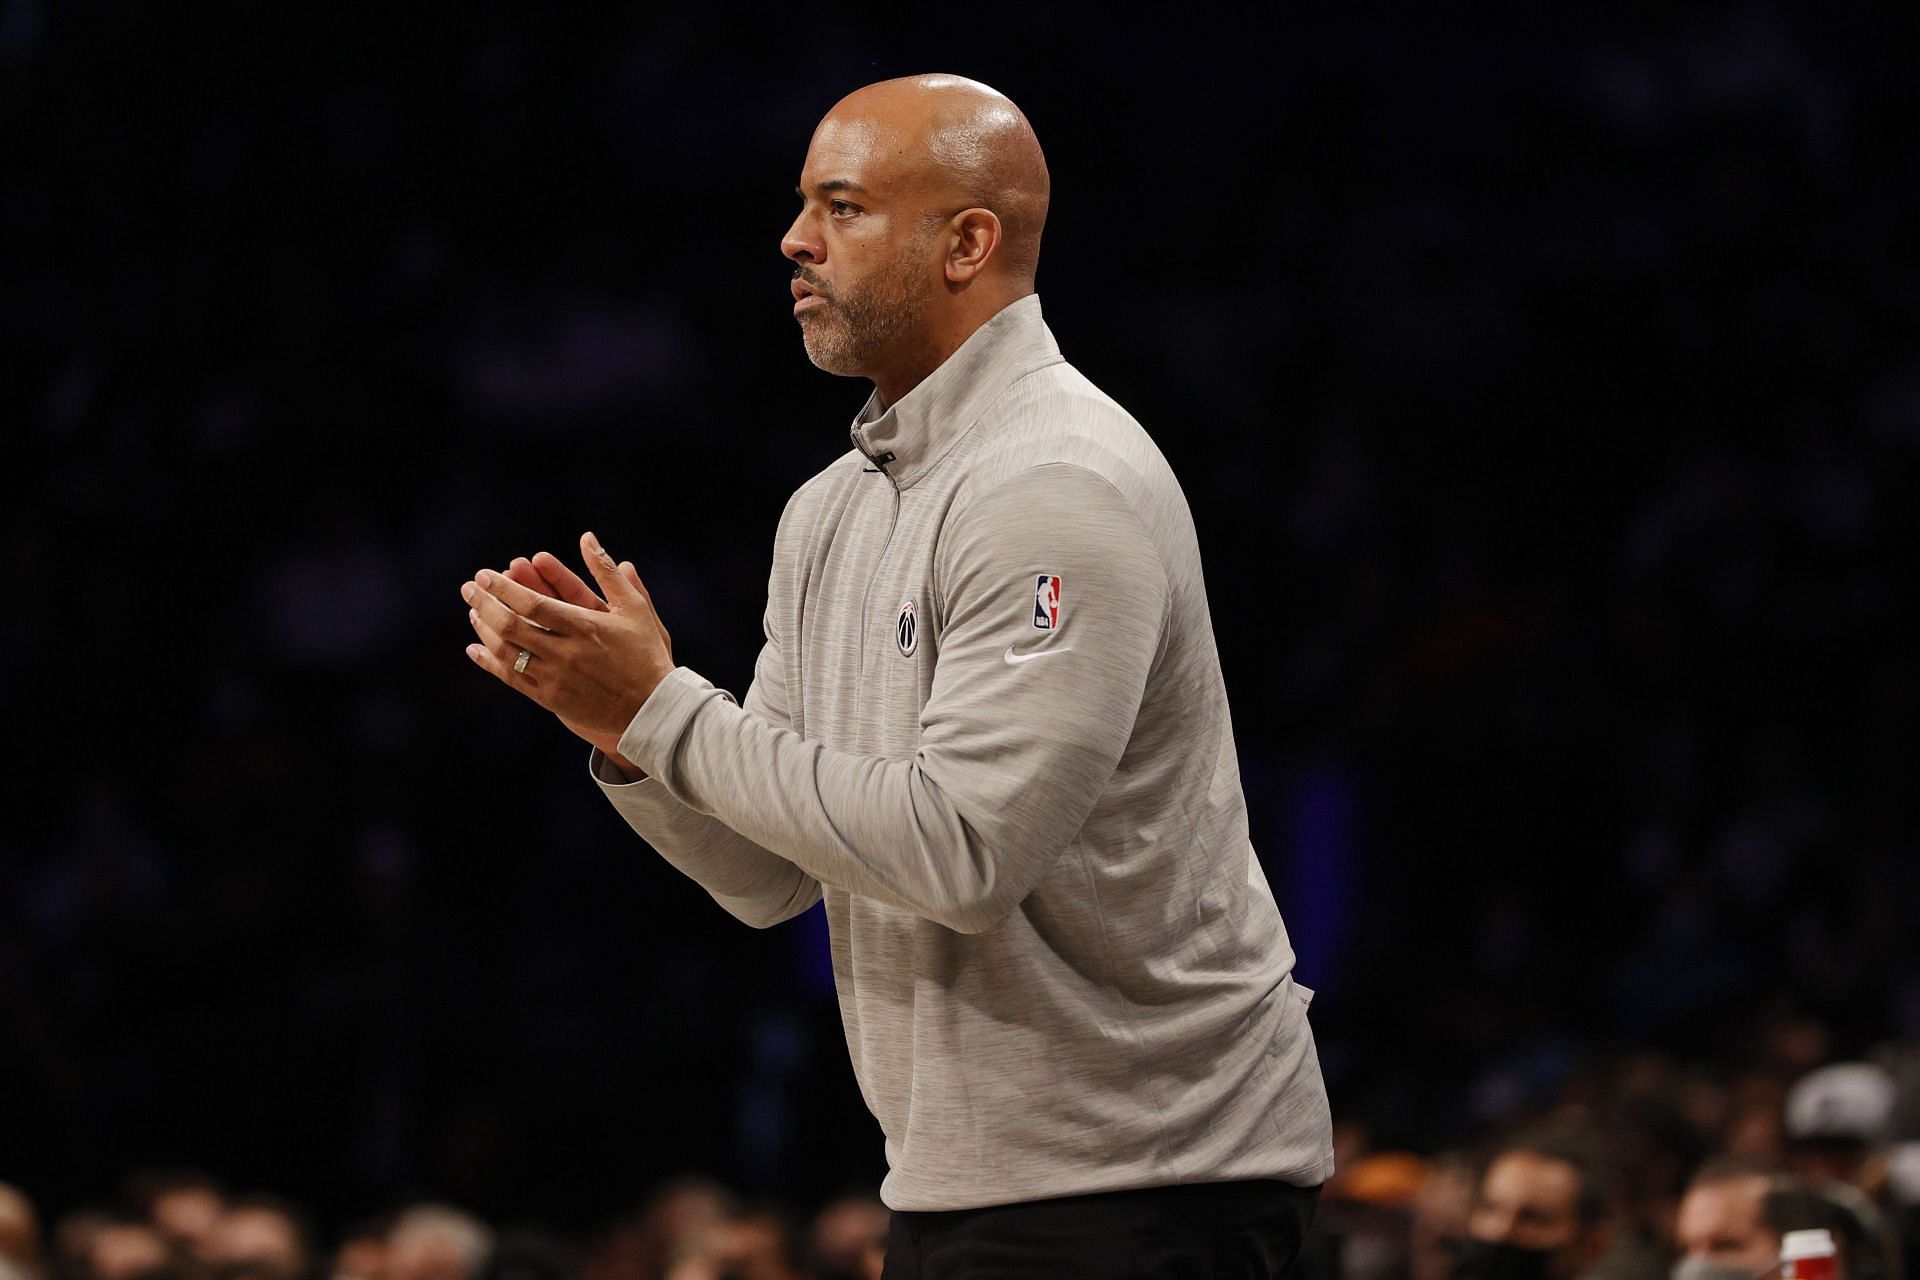 Washington Wizards head coach Wes Unseld Jr. is making an early NBA impact